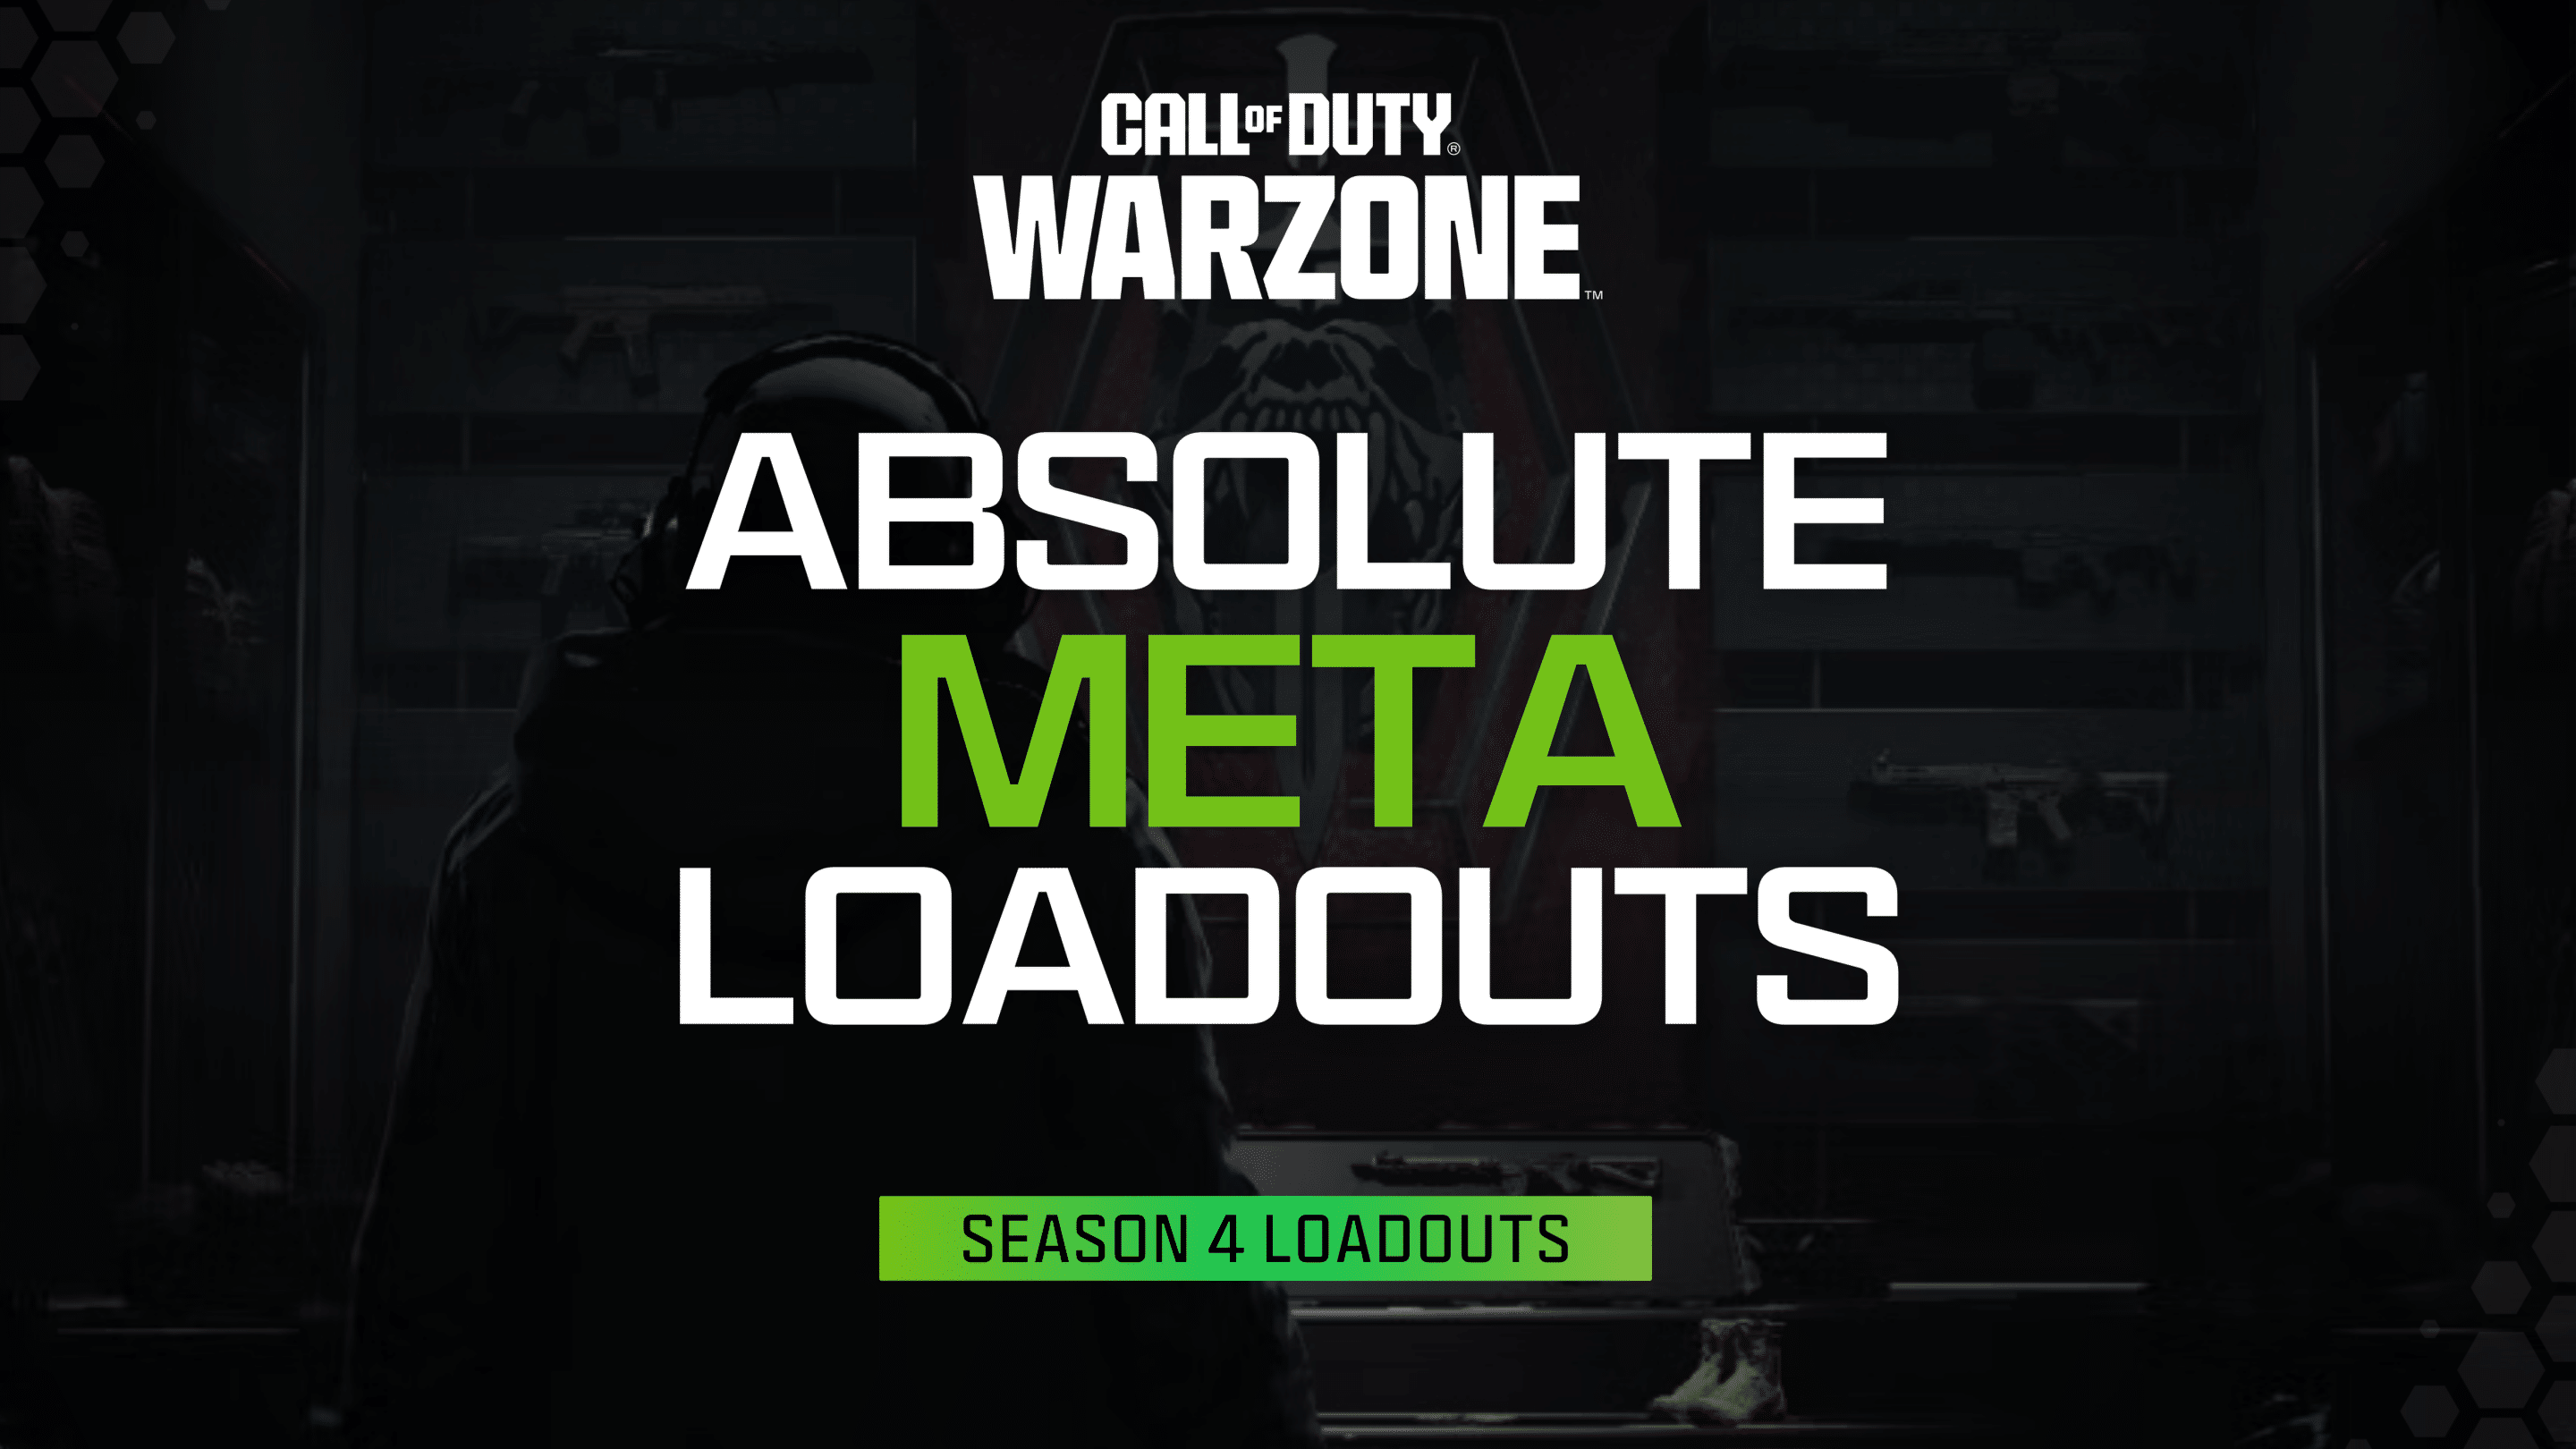 New Warzone Season 4 Meta - Best loadouts and meta guns to play after the update!